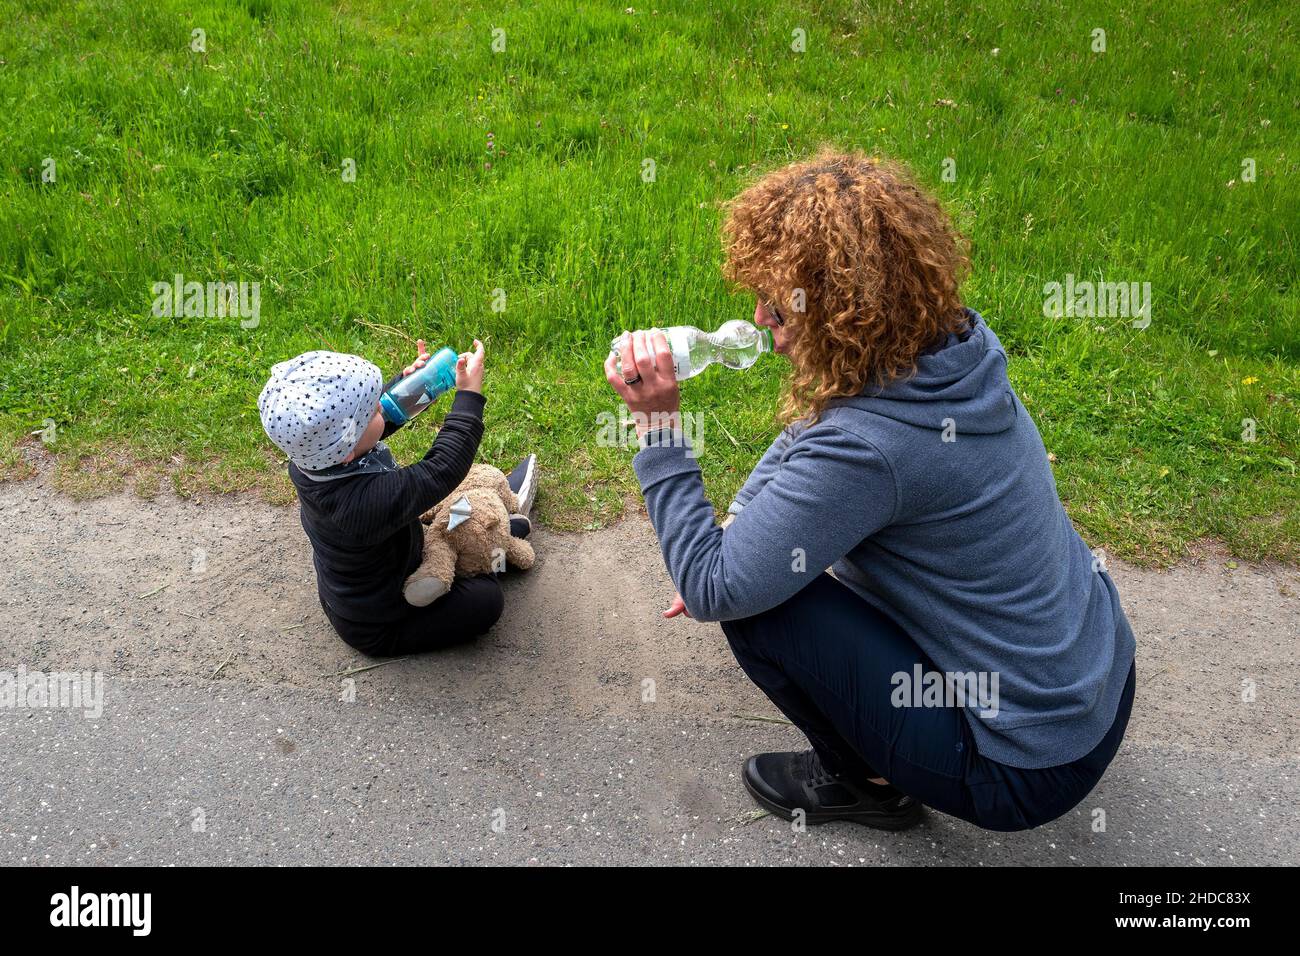 Woman and grandchild drinking from plastic bottle, Norderstedt, Schleswig Holstein, Germany, Europe Stock Photo